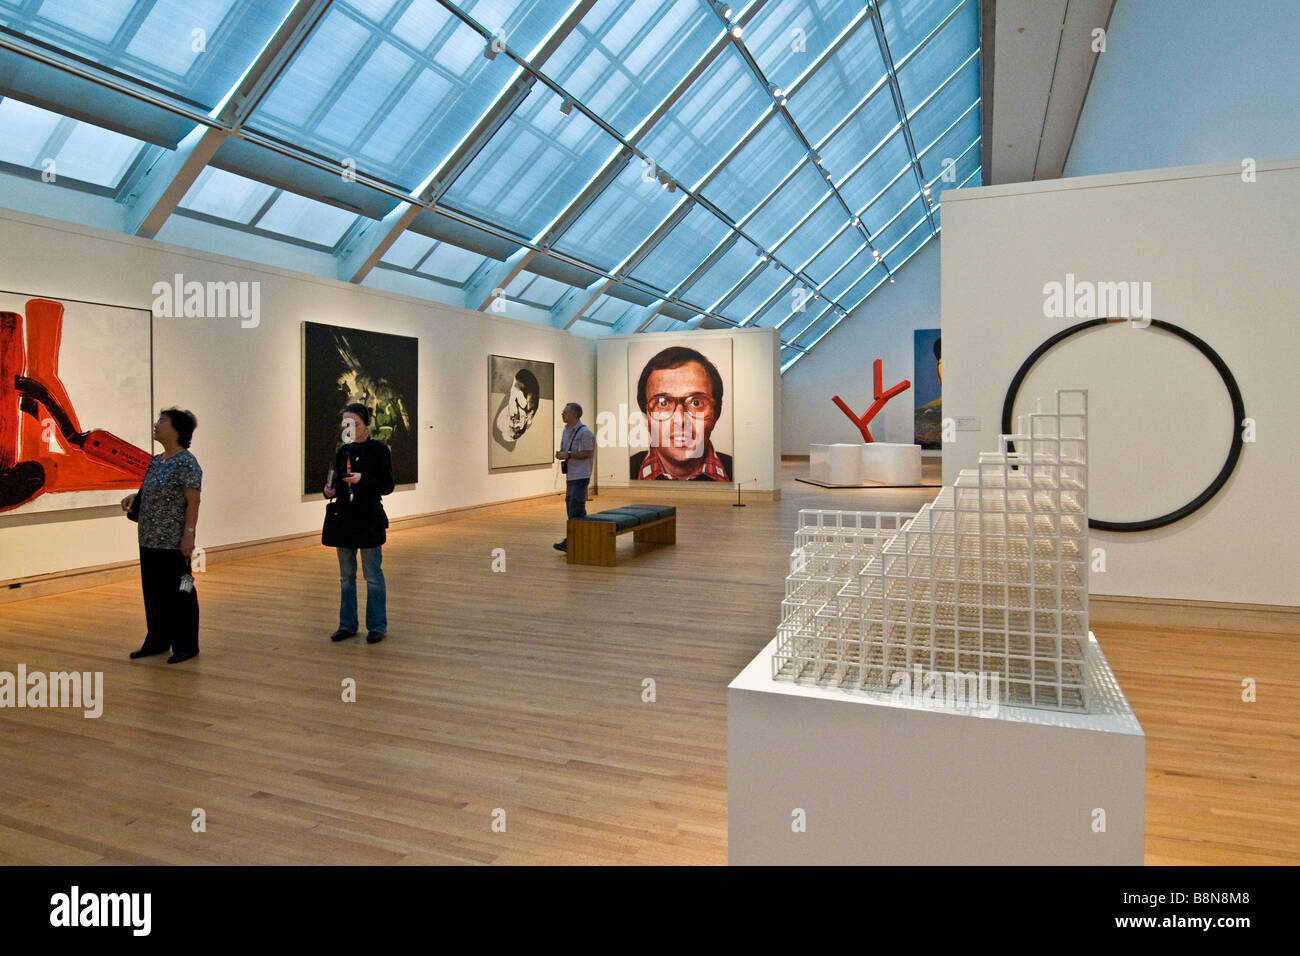 An exhibition of paintings and sculptures at the Metropolitan Museum of Art Stock Photo